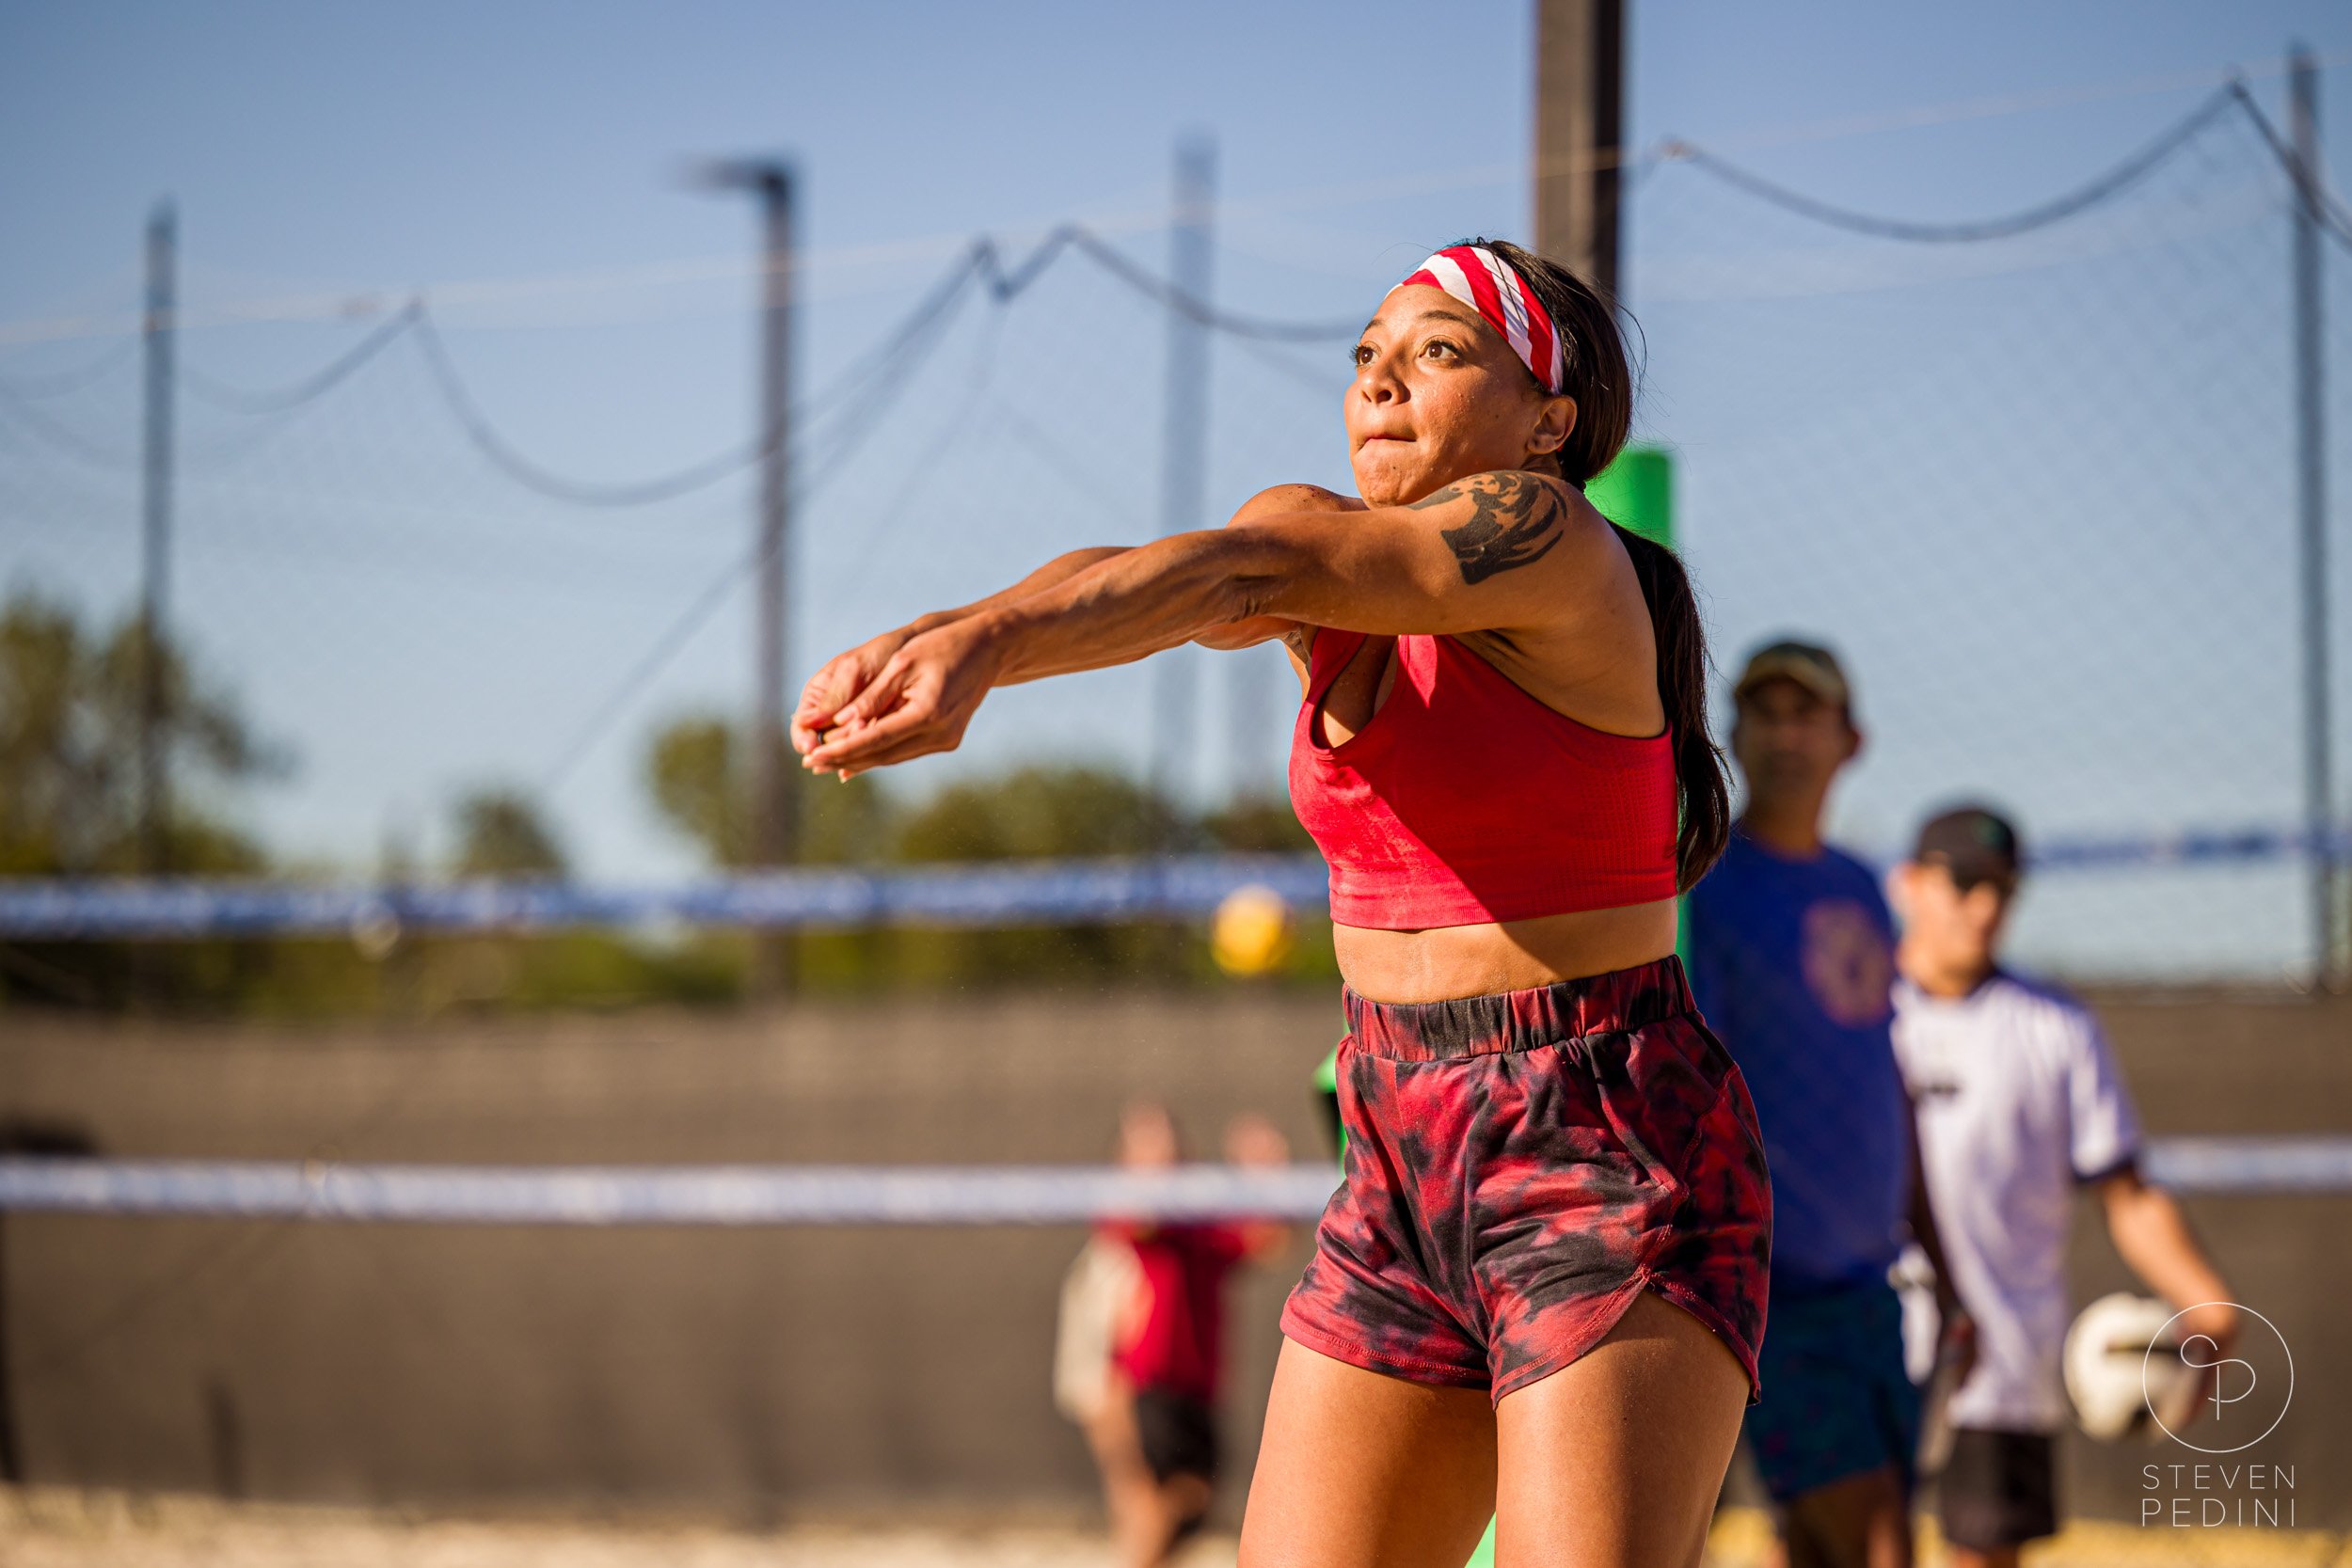 Steven Pedini Photography - Bumpy Pickle - Sand Volleyball - Houston TX - World Cup of Volleyball - 00025.jpg